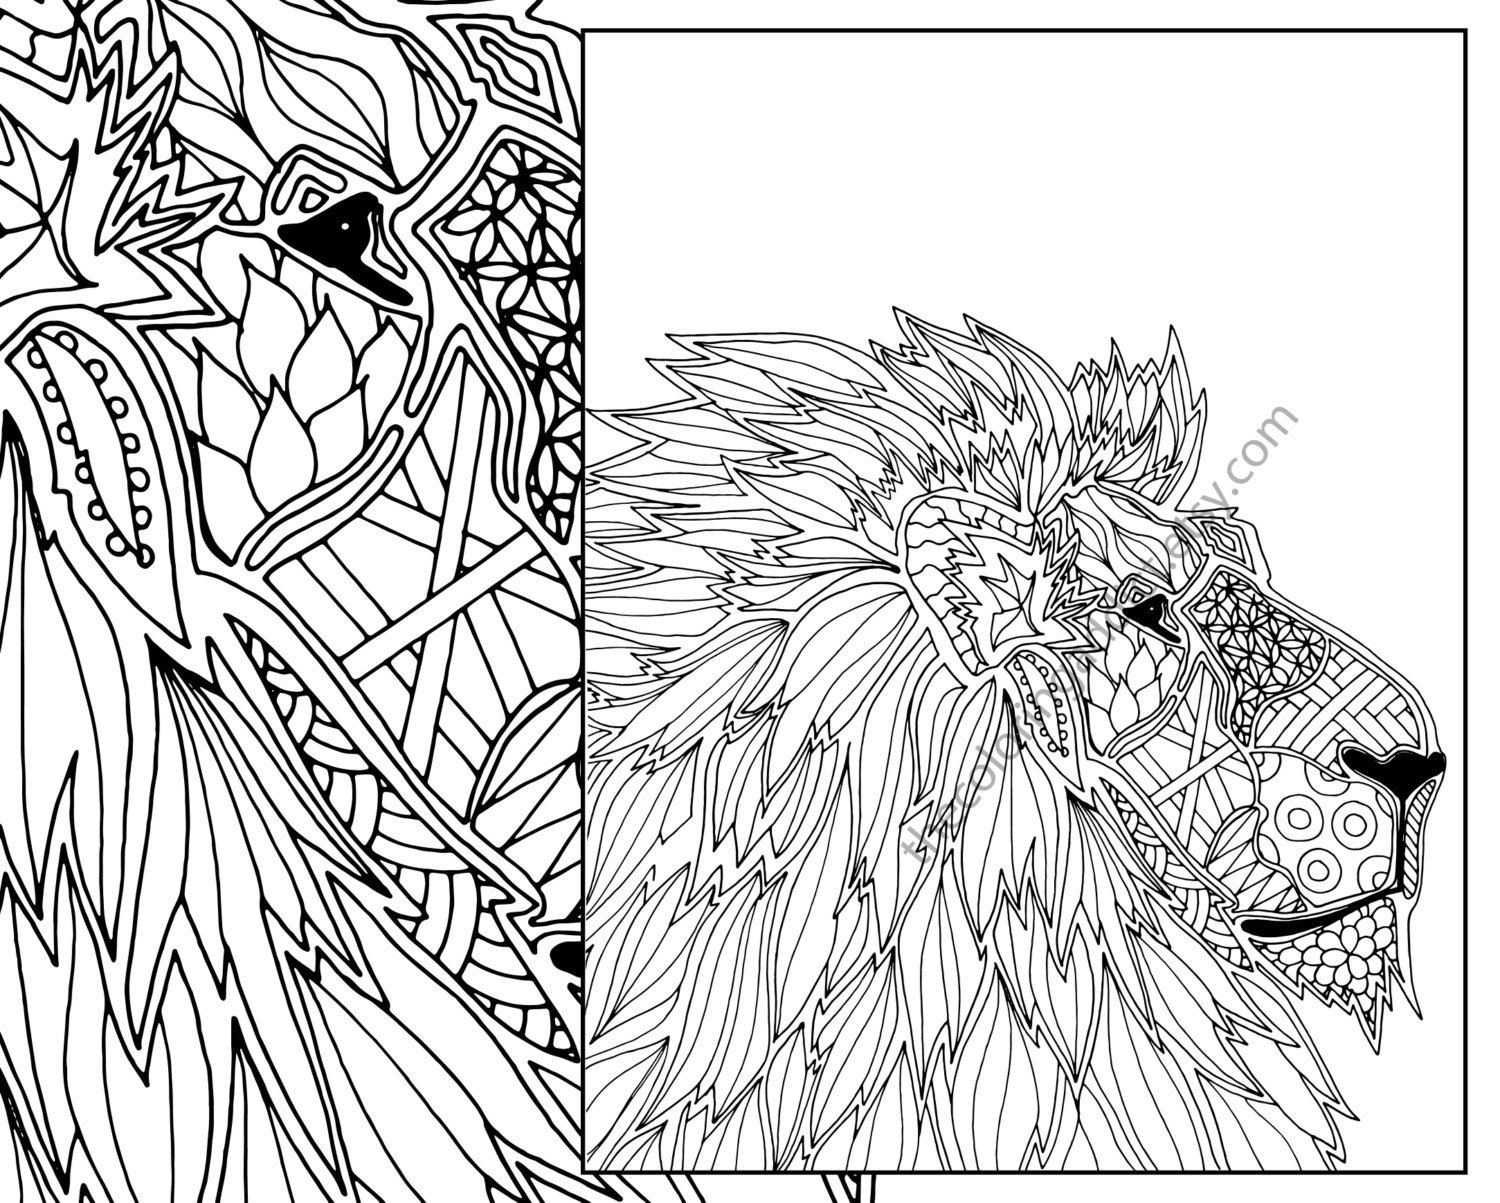 Coloring Book For Nursery Pdf - 178+ DXF Include